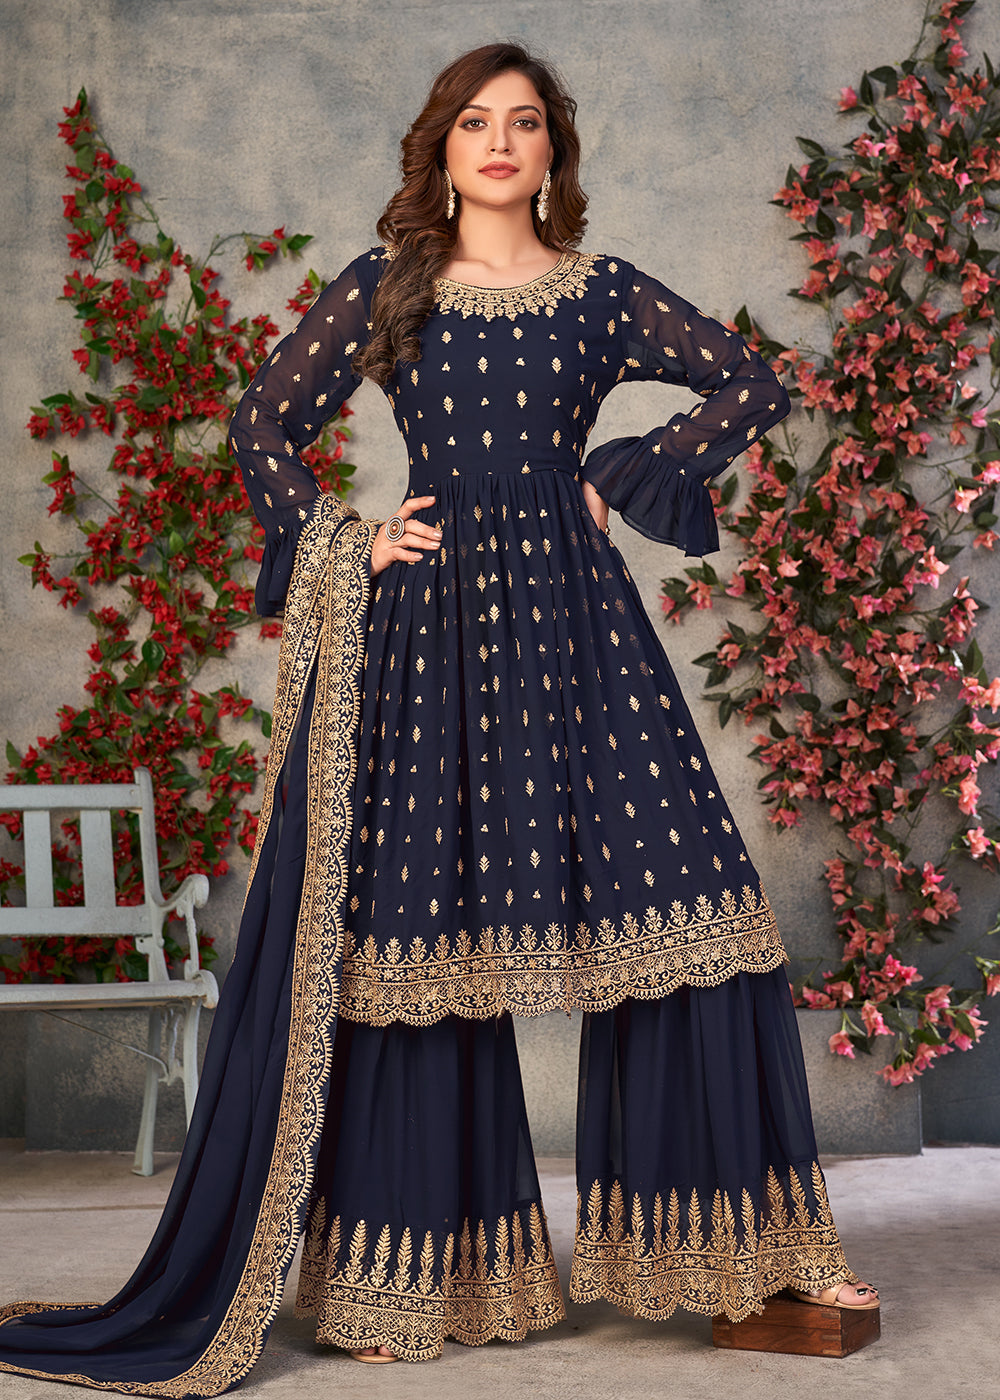 Shop Now Vintage Navy Blue Georgette Sangeet Wear Sharara Suit Online at Empress Clothing in USA, UK, Canada, Germany & Worldwide.